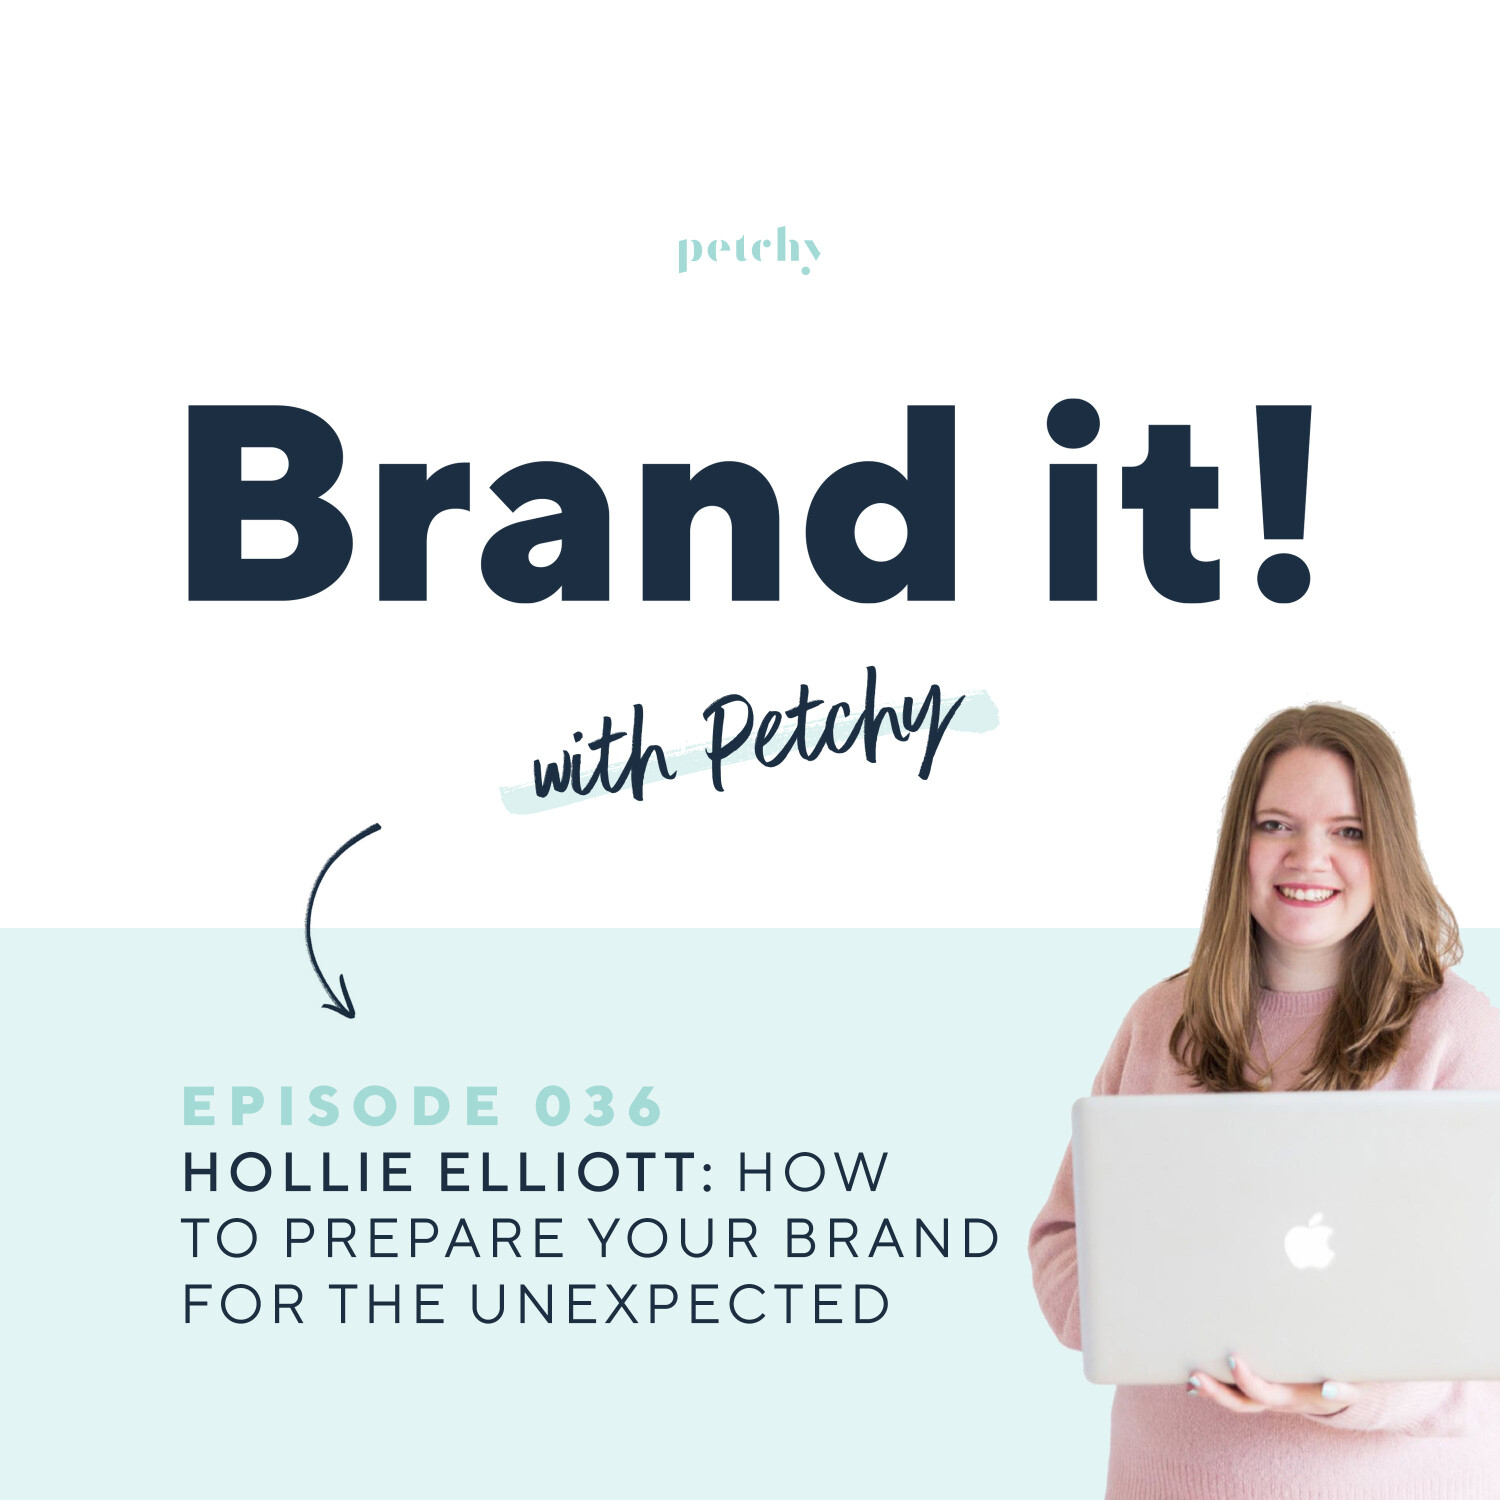 When the unexpected happens - is your brand strong enough to support you? w/ Hollie Elliott